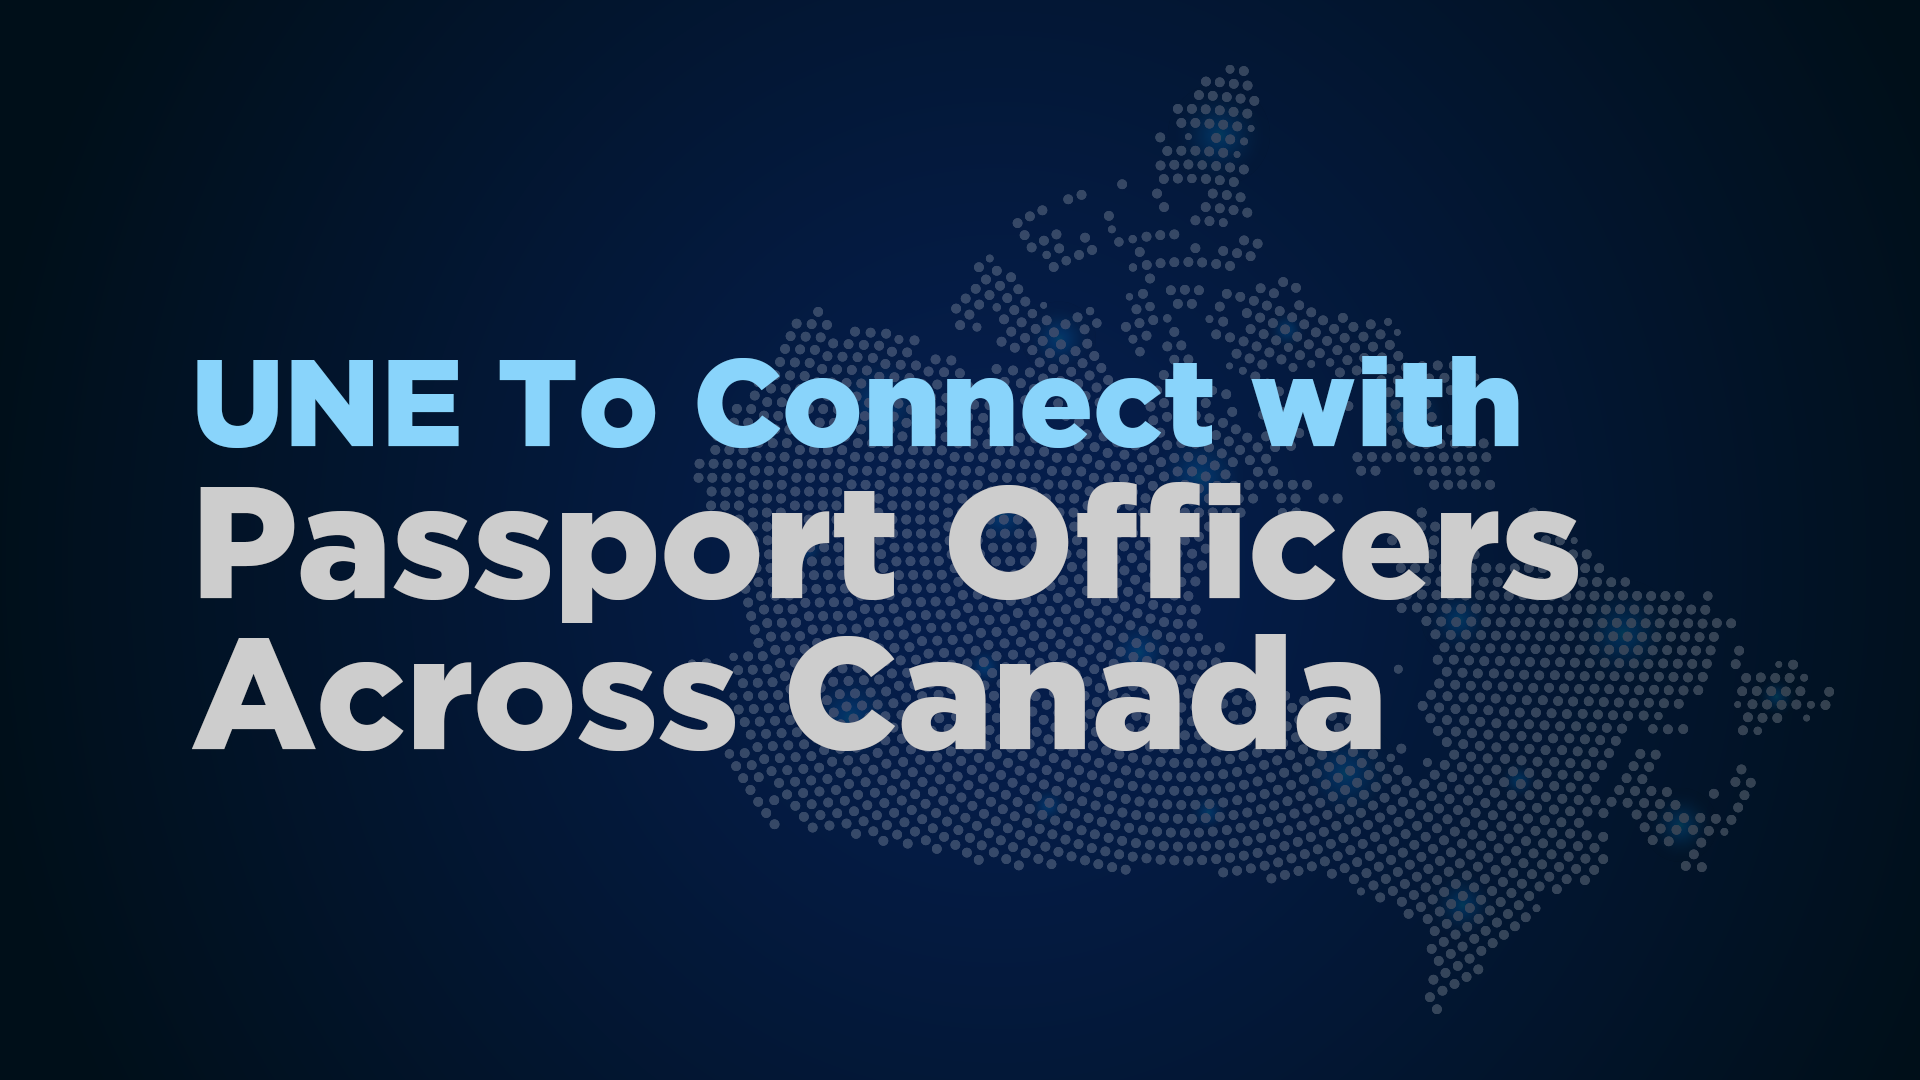 UNE To Connect with Passport Officers Across Canada